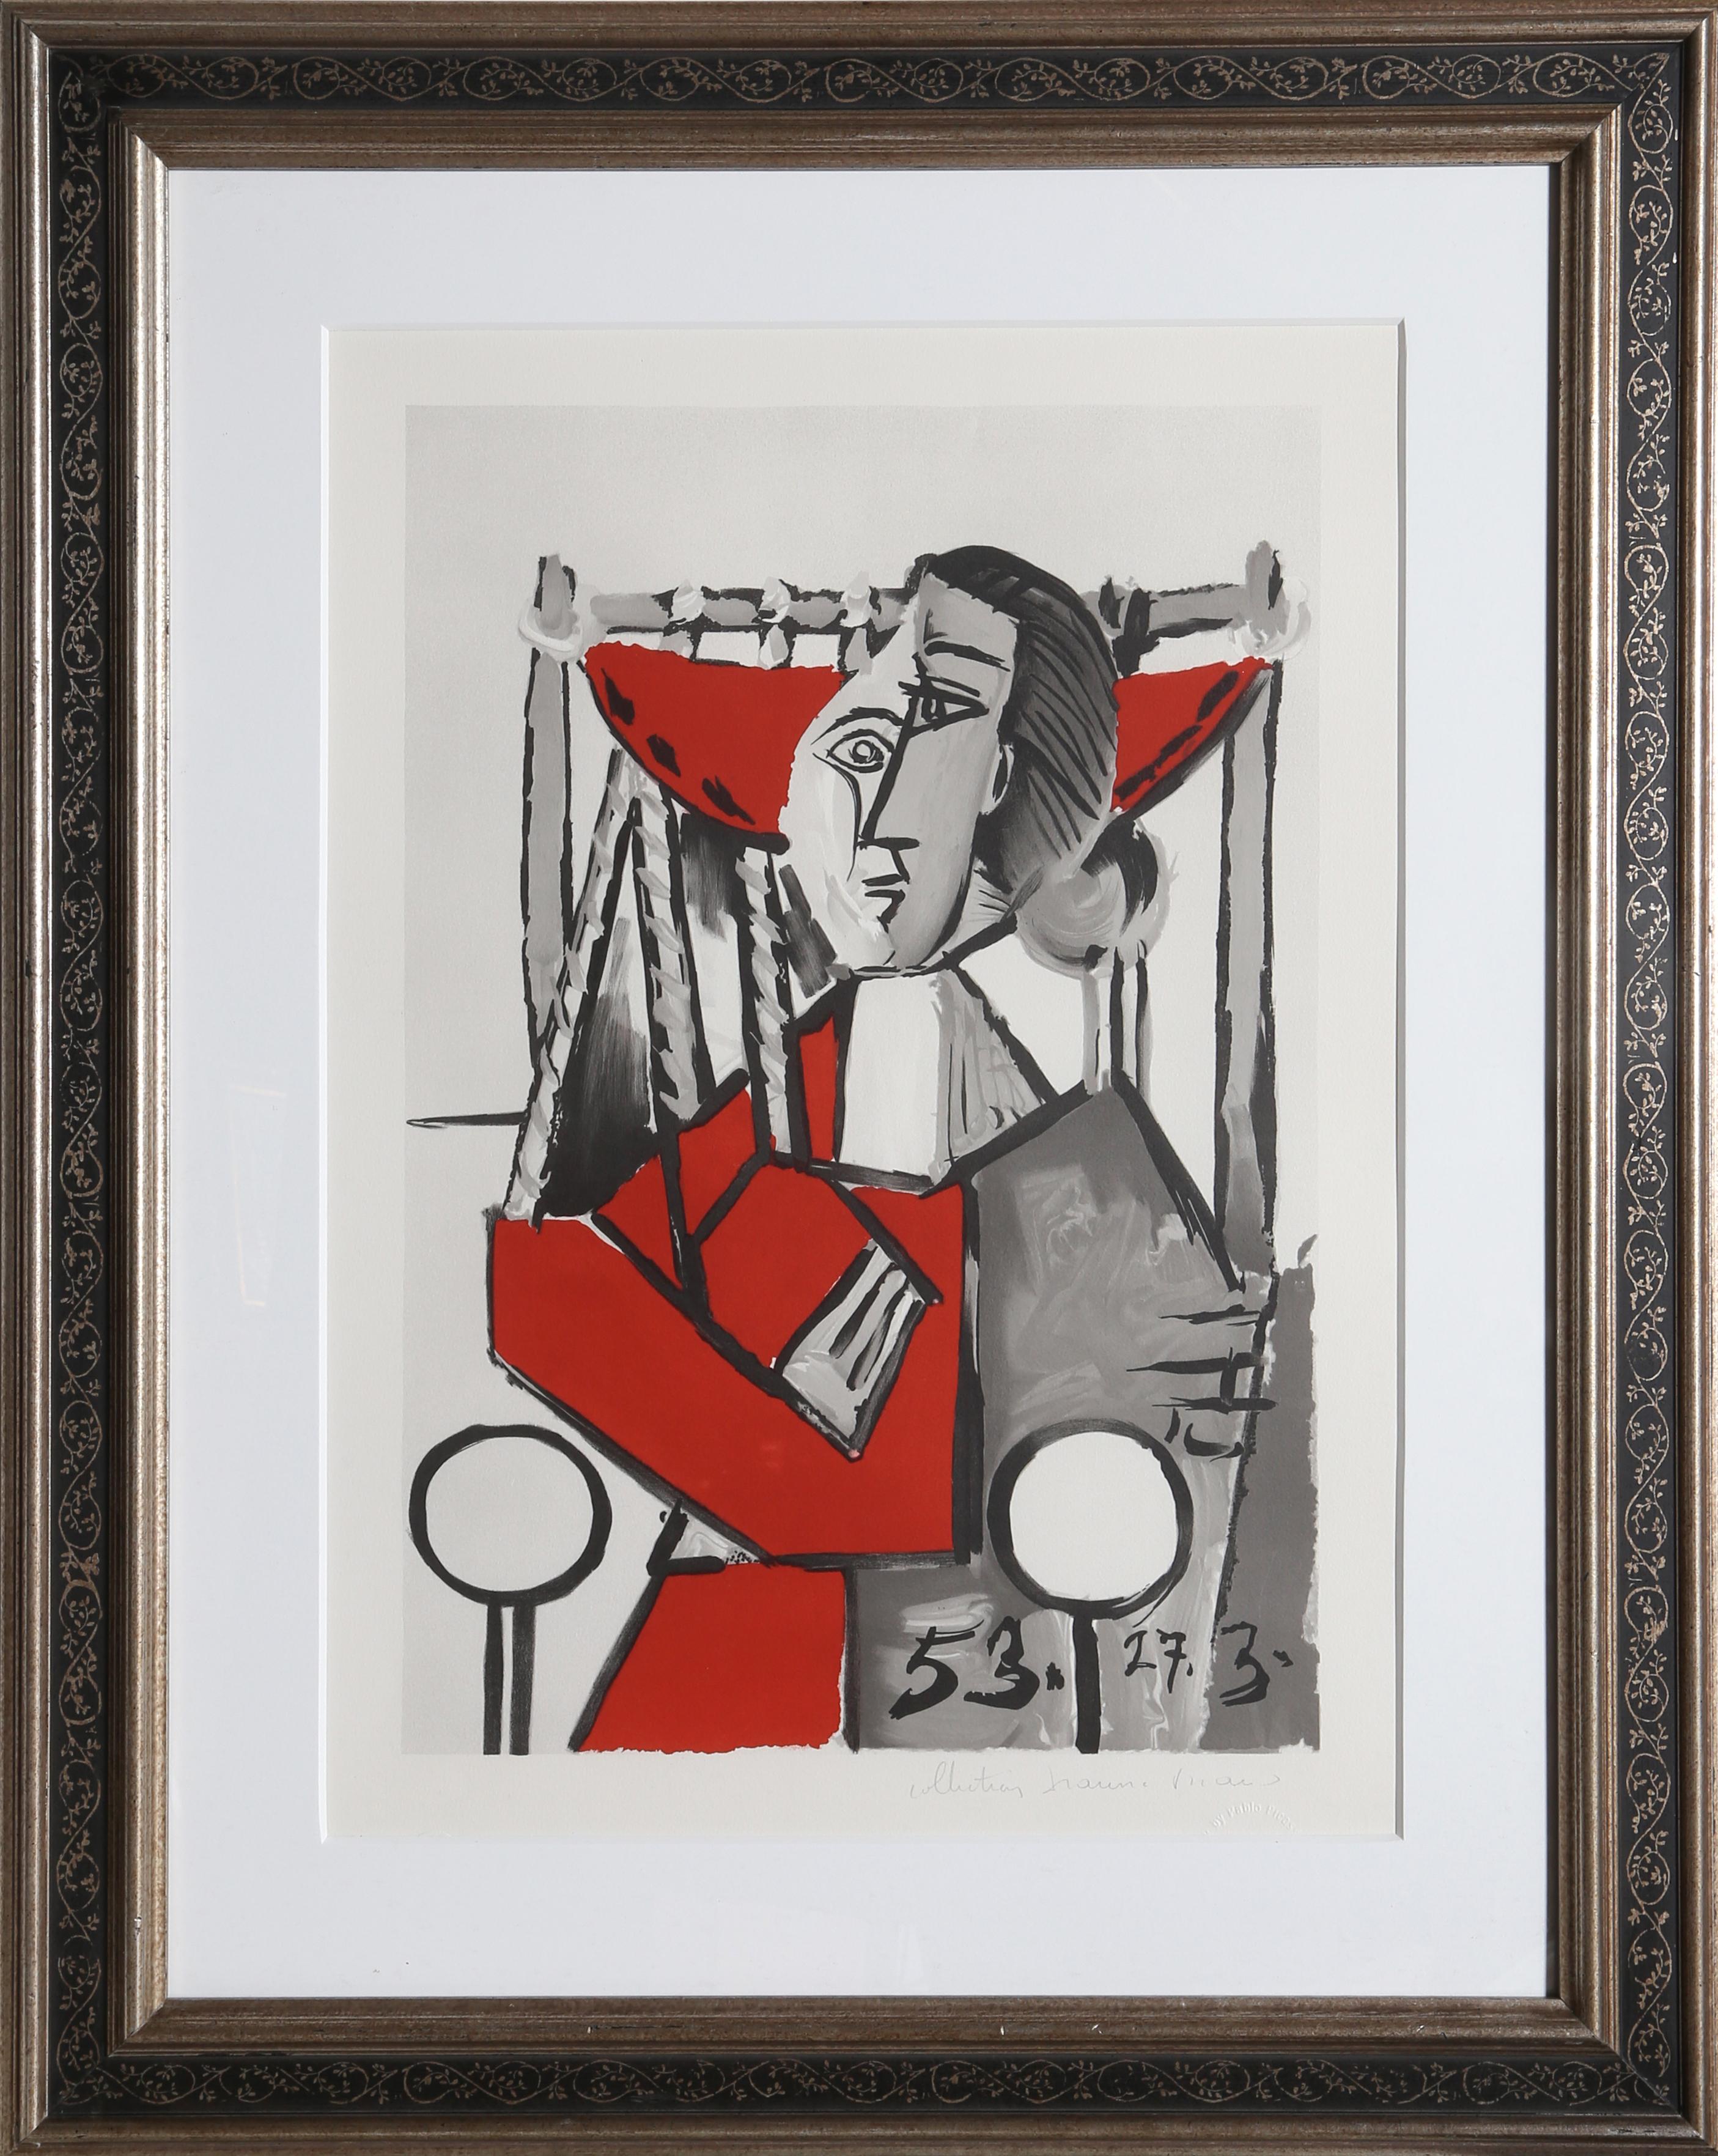 Pablo Picasso’s portrayal of a woman in an armchair is a classic example of his avant-garde Cubist style. Rendered as a series of angular shapes and thick lines, the figure of the woman appears fragmented and reduced to mere shapes, forming new